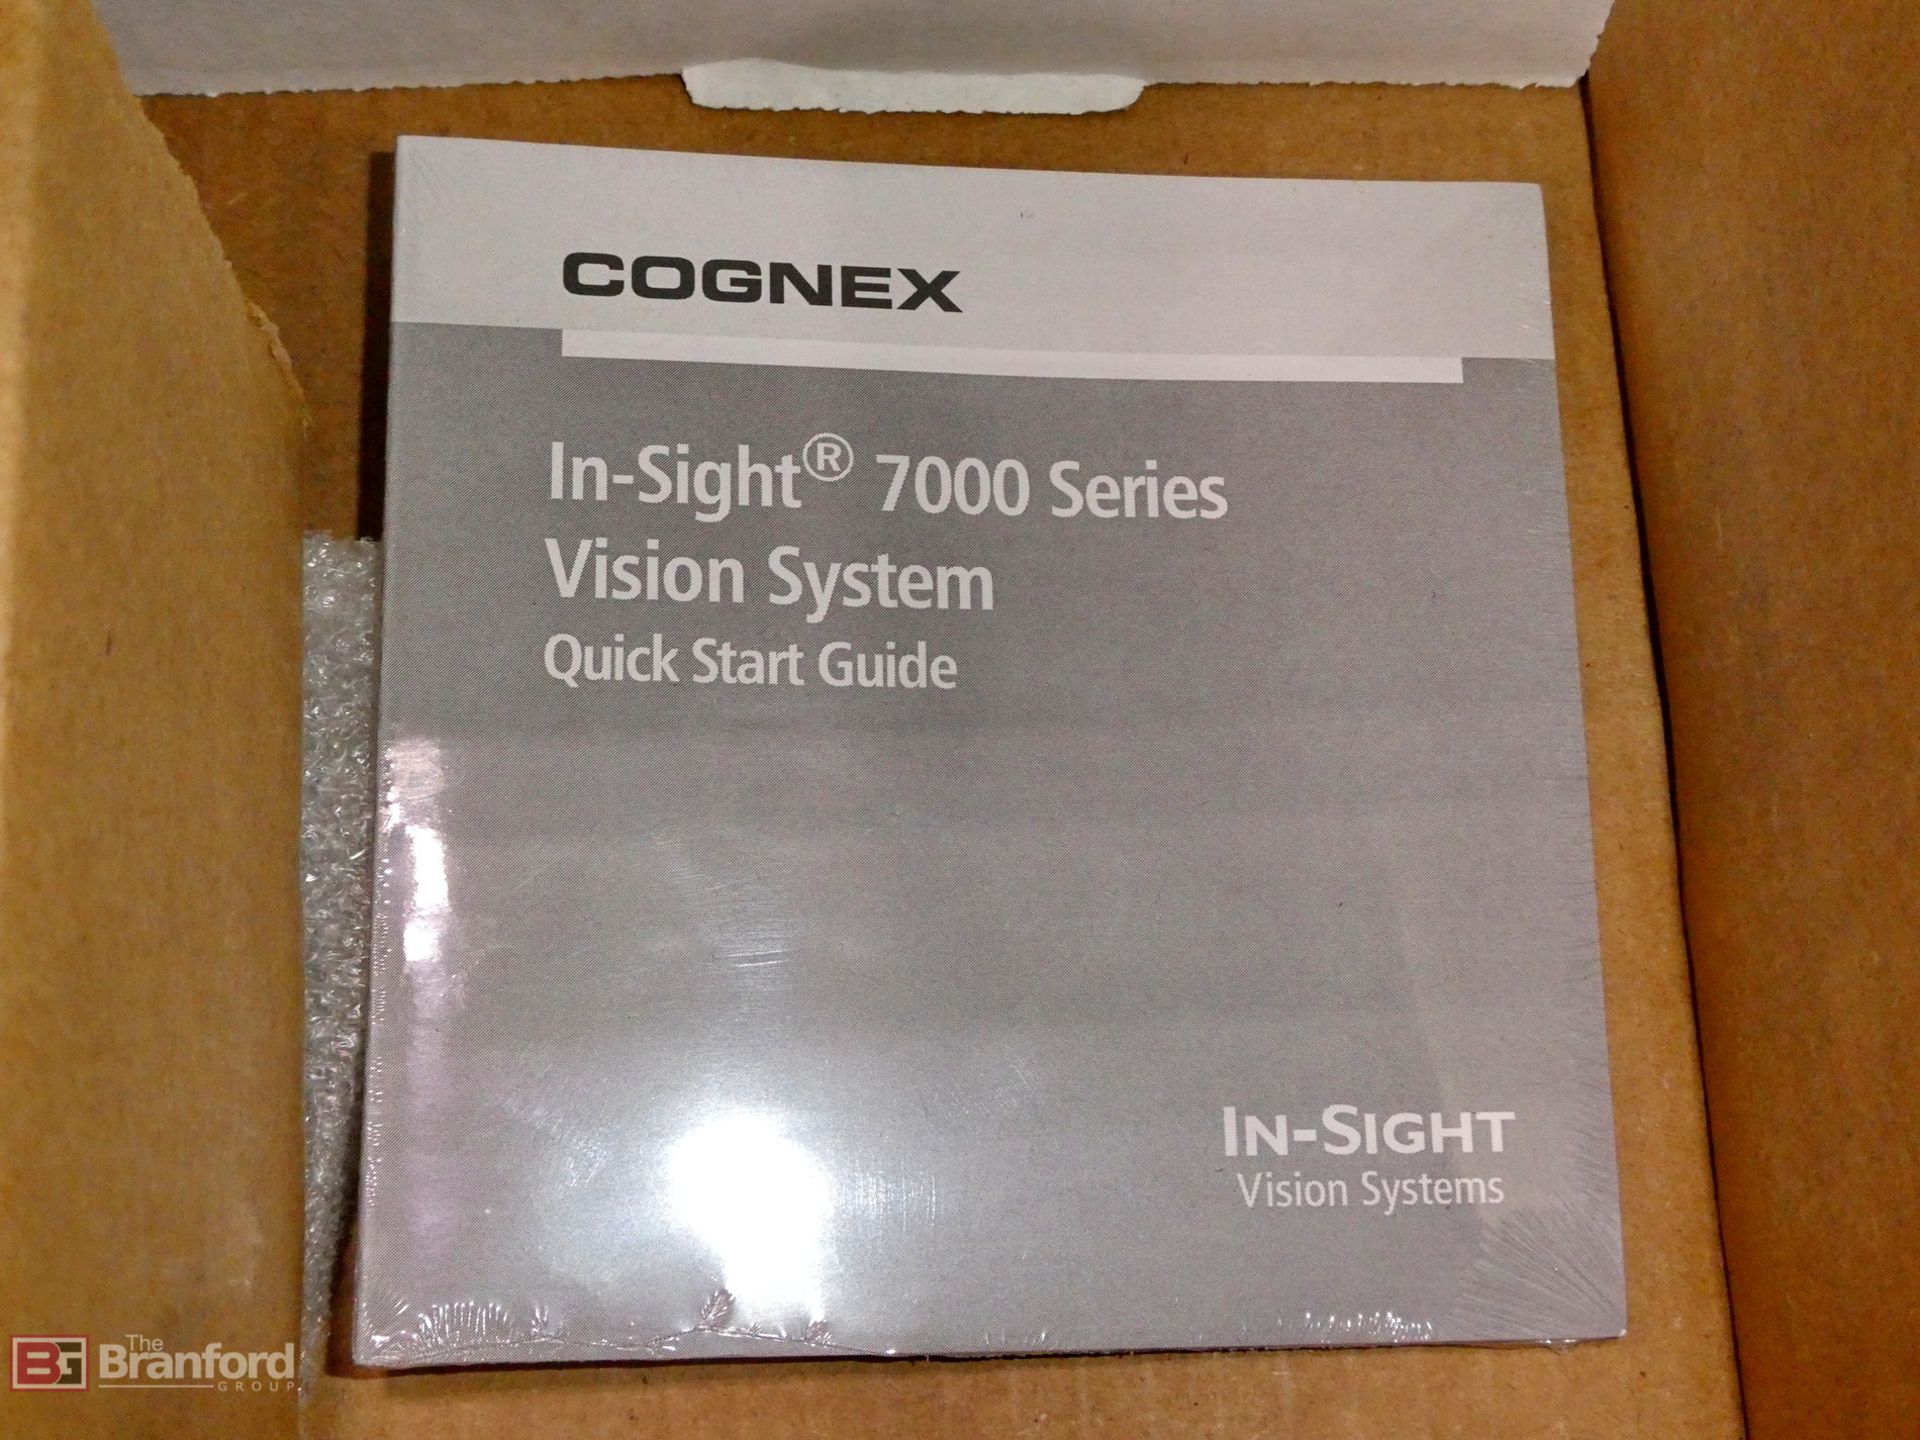 Cognex In-Sight 7000 Series, Vision System - Image 3 of 5